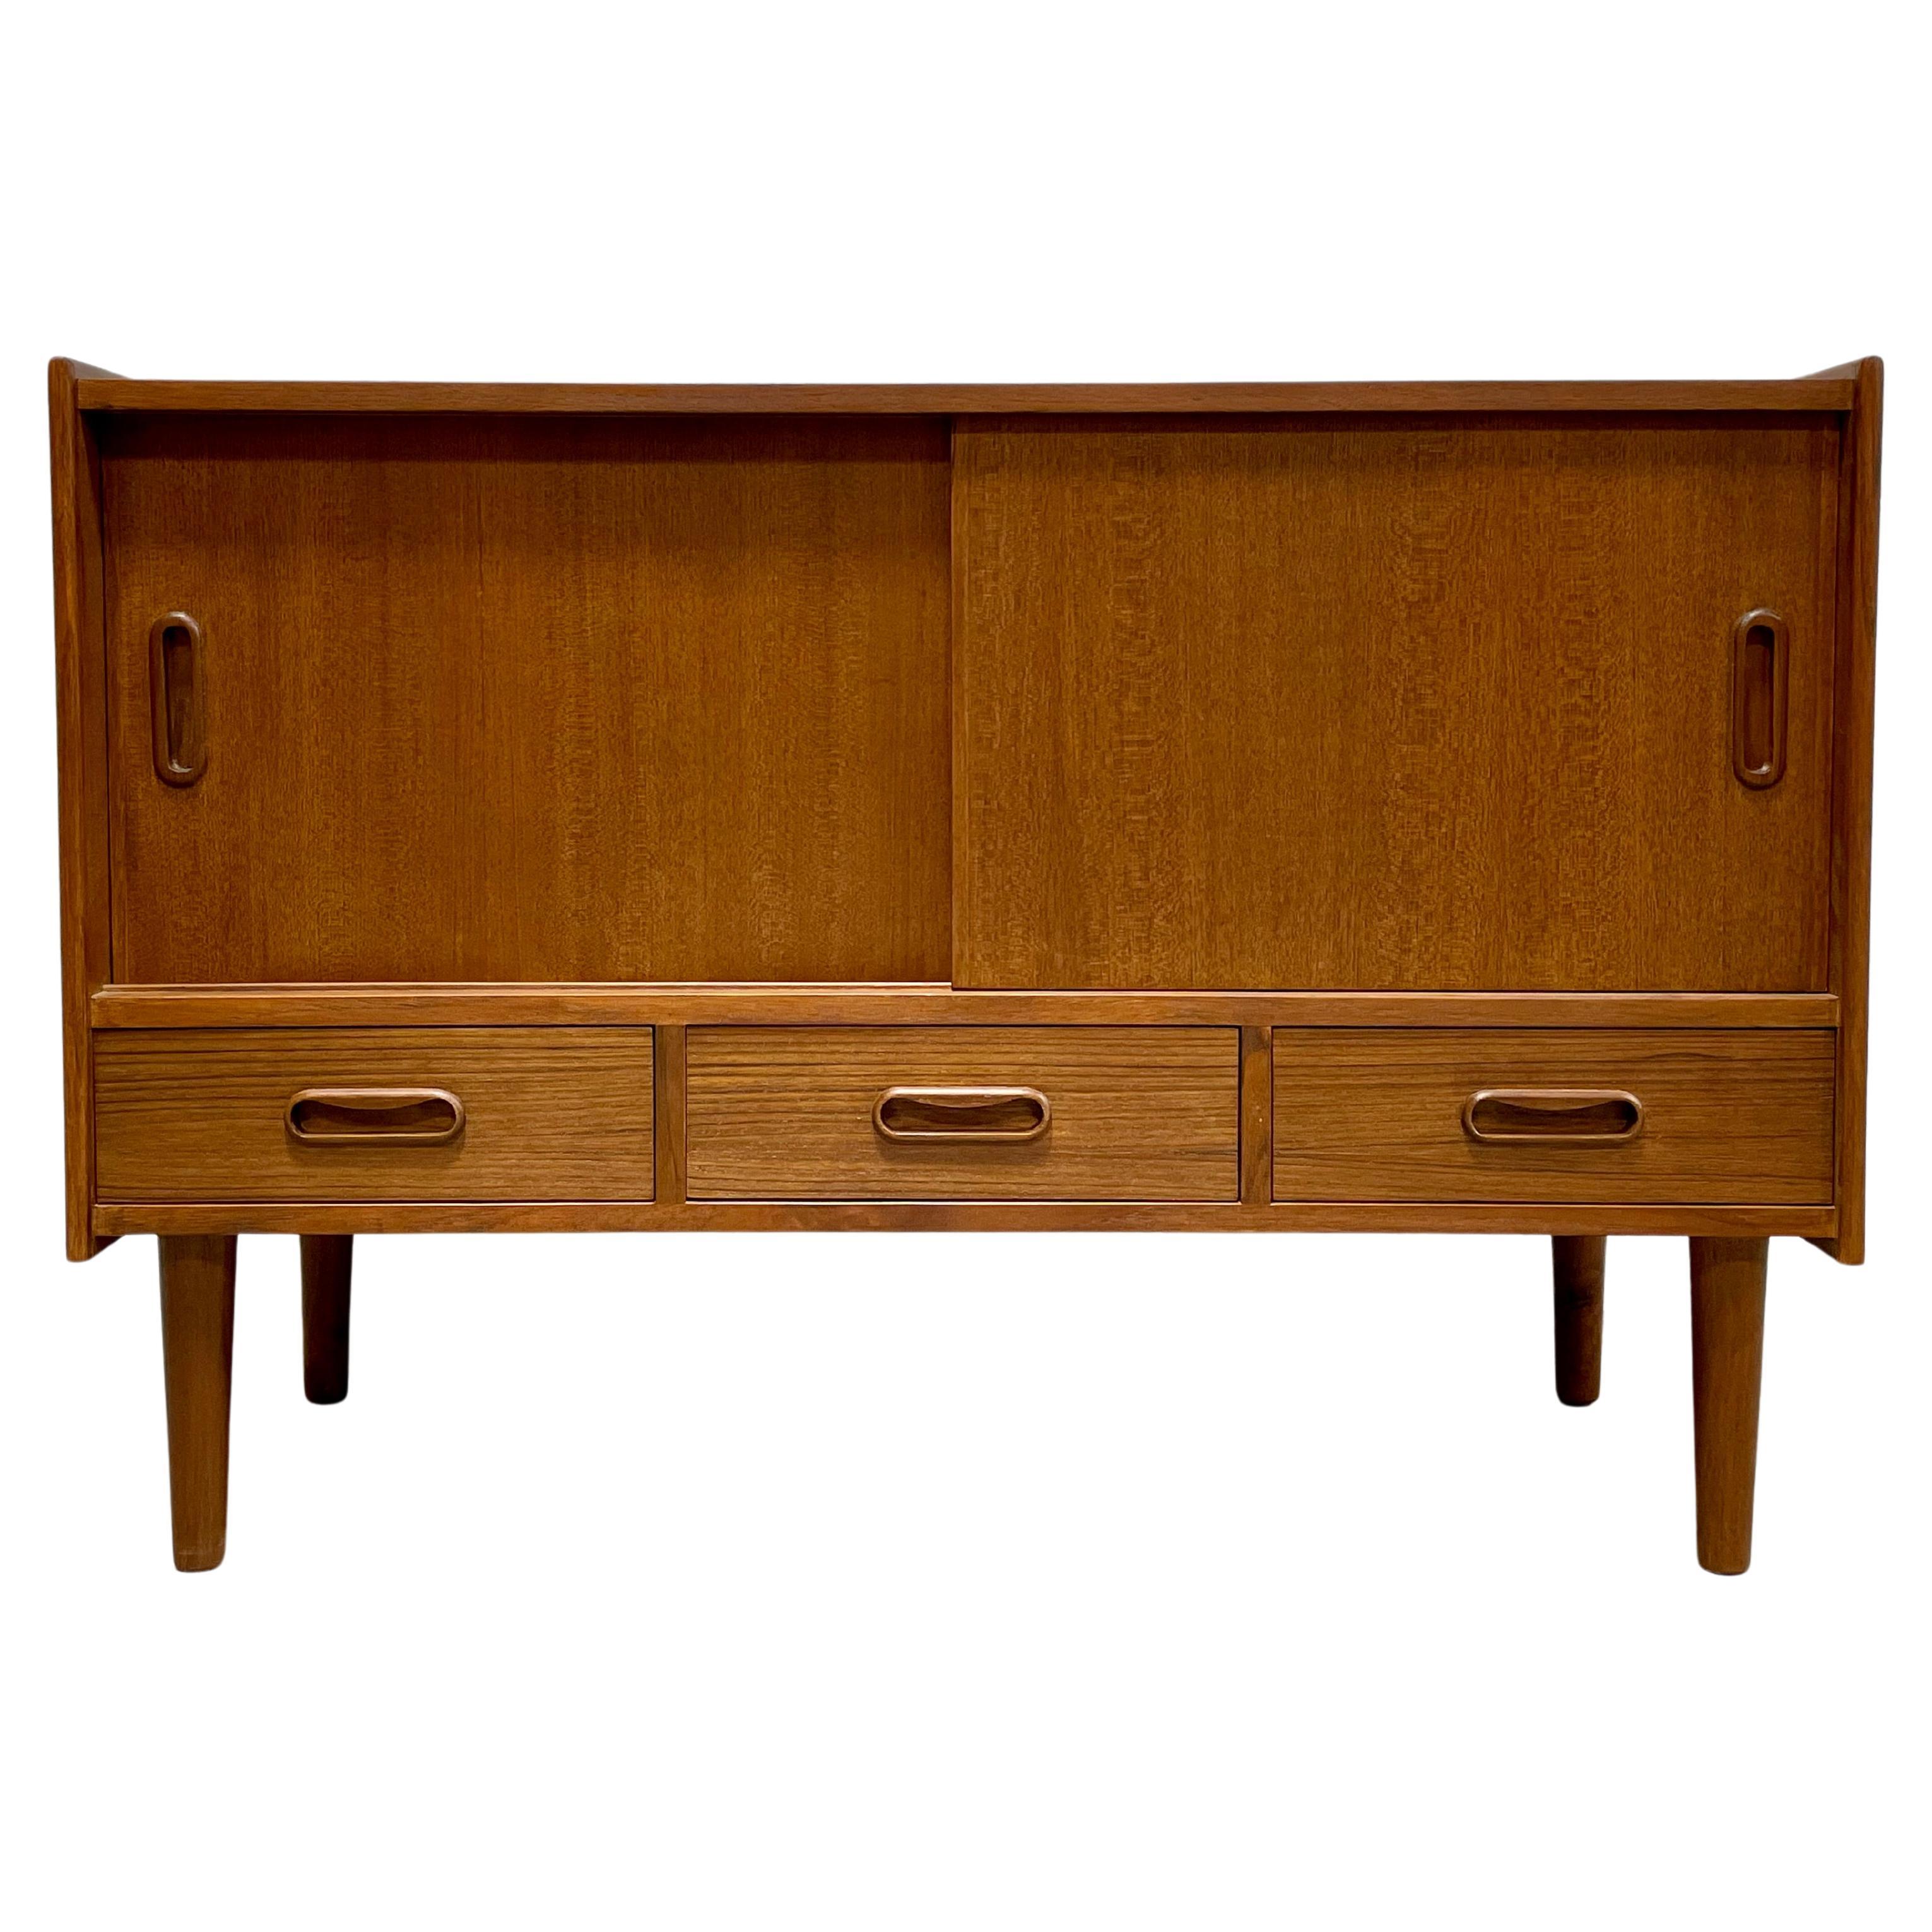 Mid Century Modern styled Handmade Credenza / Media Stand in a perfectly tailored apartment size. This is the smallest credenza in our handmade lineup but boy does it pack a punch, providing you with the essential storage you need without taking up